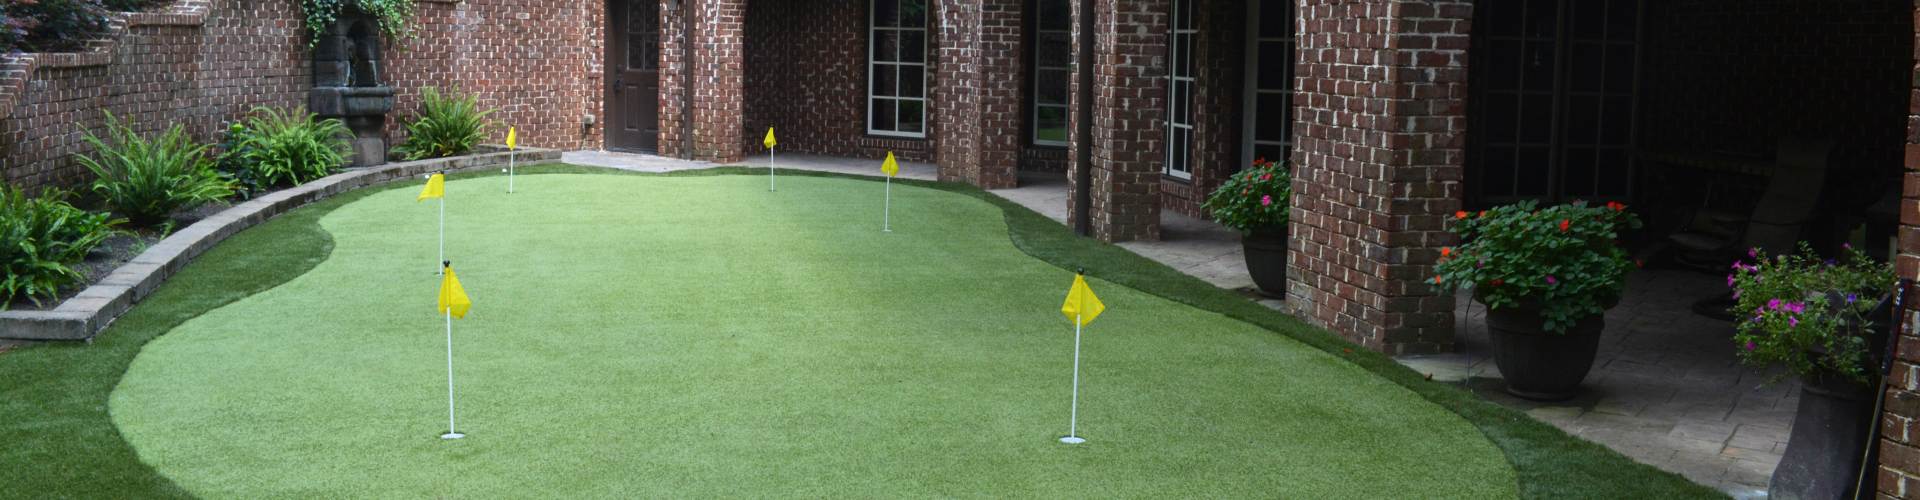 How Much Does A Backyard Putting Green Cost?